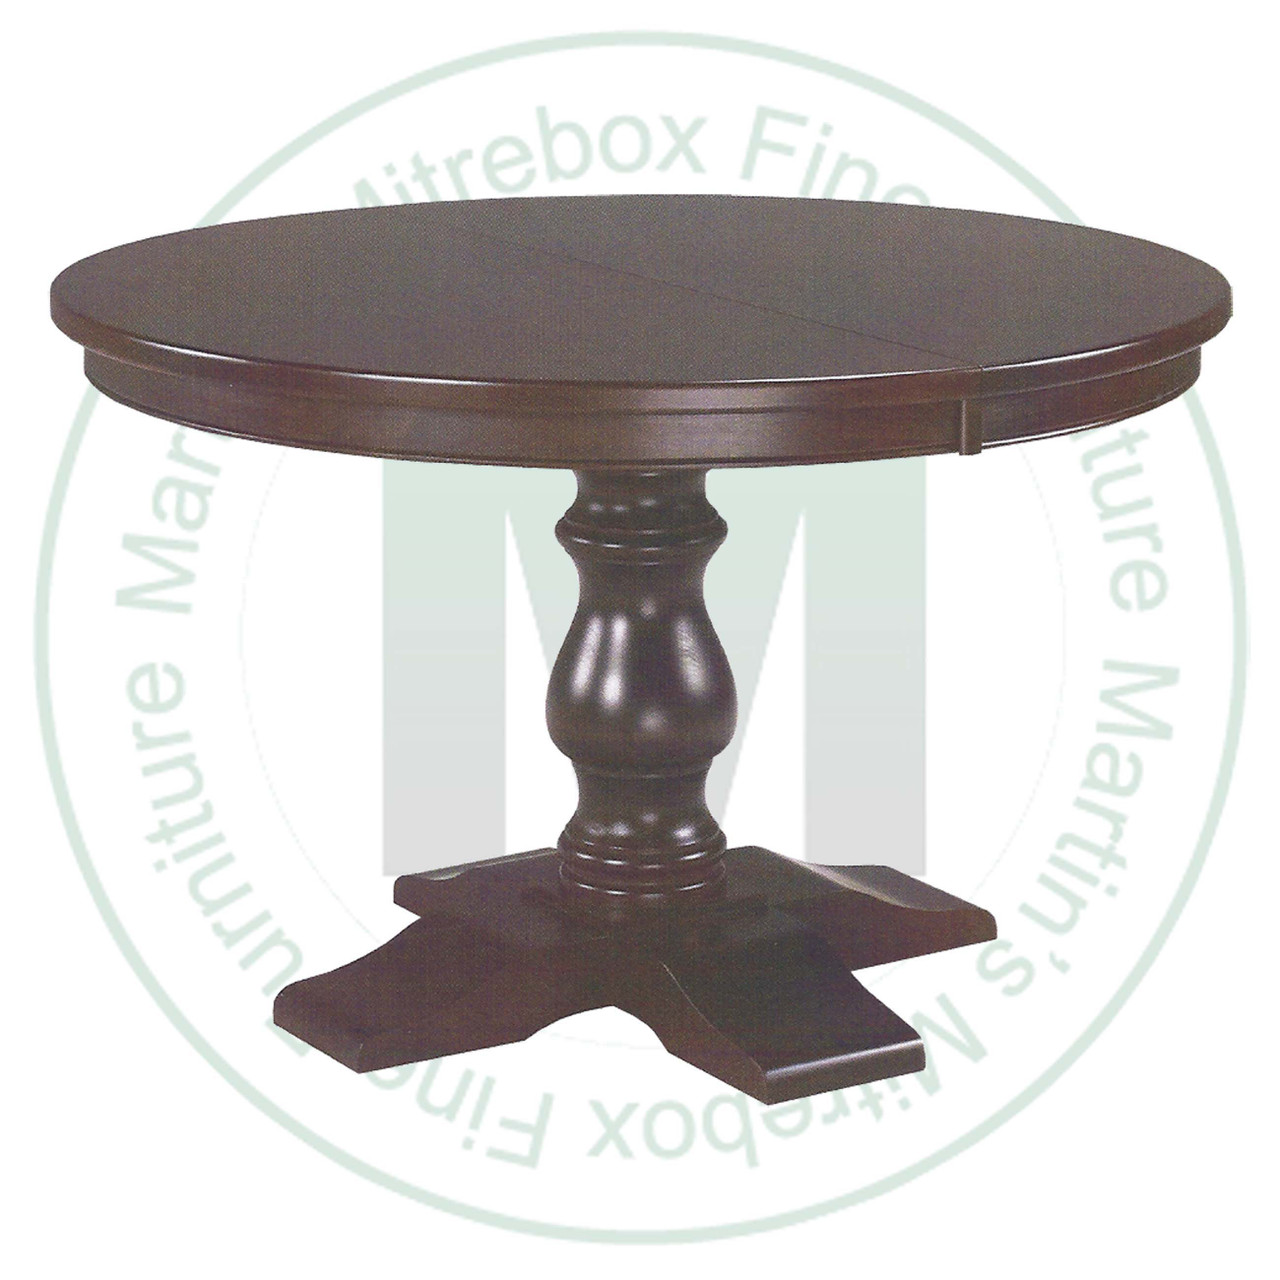 Oak Savannah Single Pedestal Table 60''D x 60''W x 30''H With 2 - 12'' Leaves Table. Table Has 1'' Thick Top.